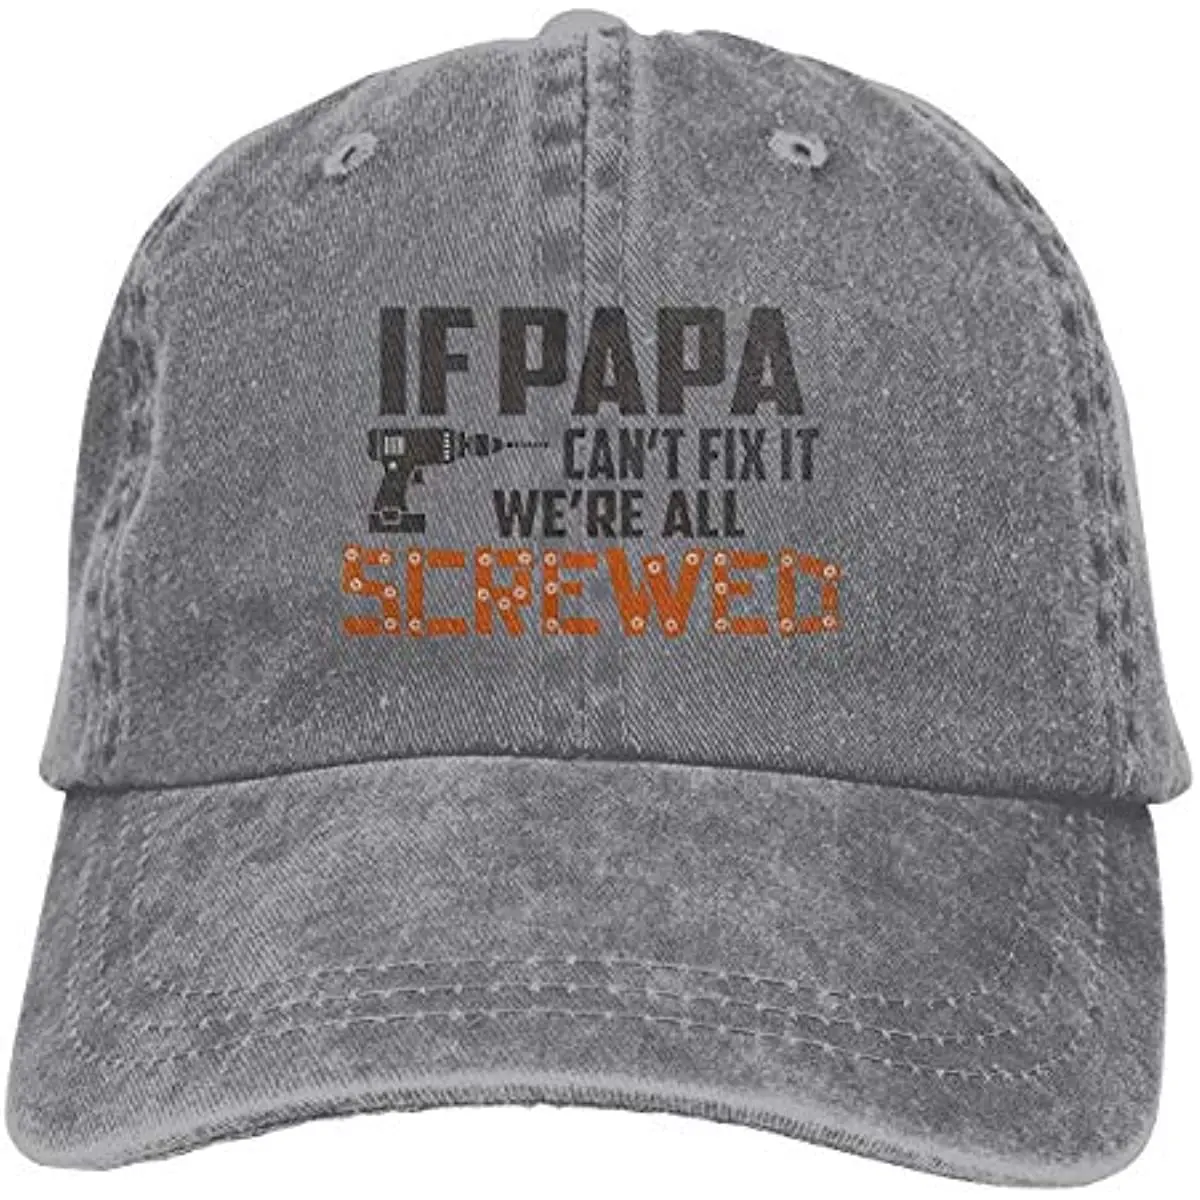 

papa unisex adult womens Baseball cap if papa can't fix it we're all screwed